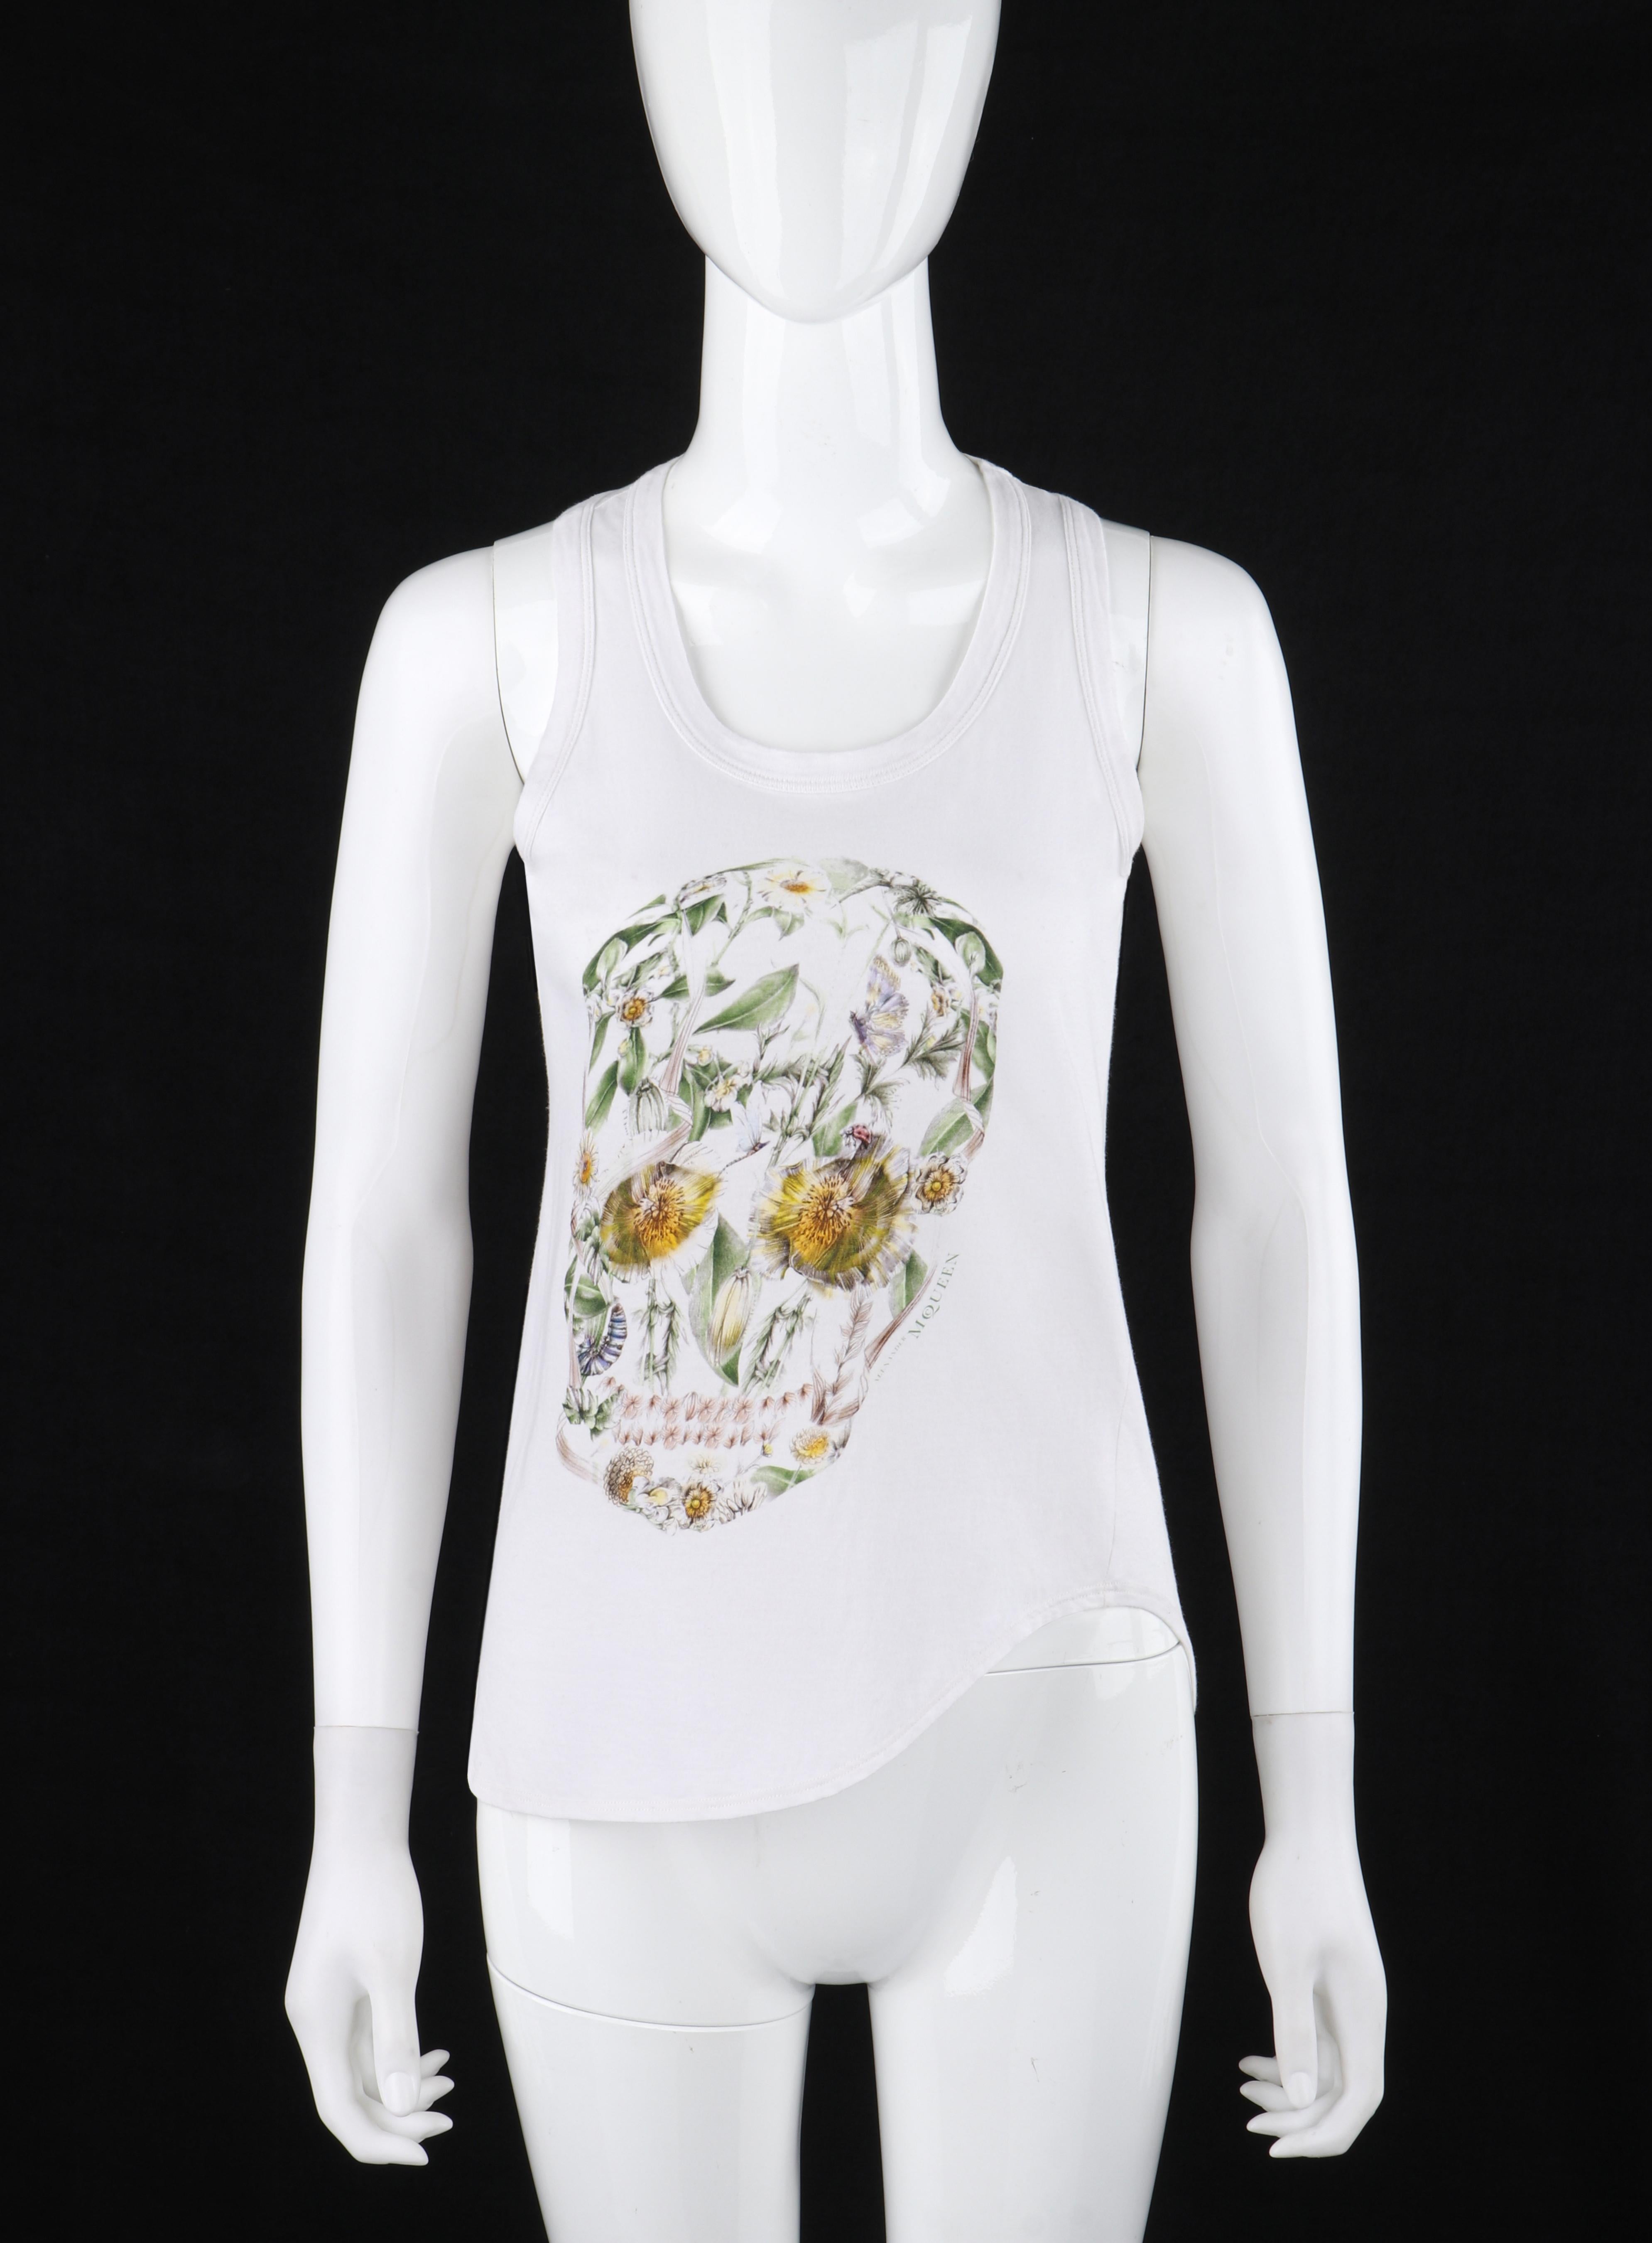 ALEXANDER McQUEEN S/S 2009 White Multicolor Floral Skull Asymmetrical Tank Top In Good Condition For Sale In Thiensville, WI